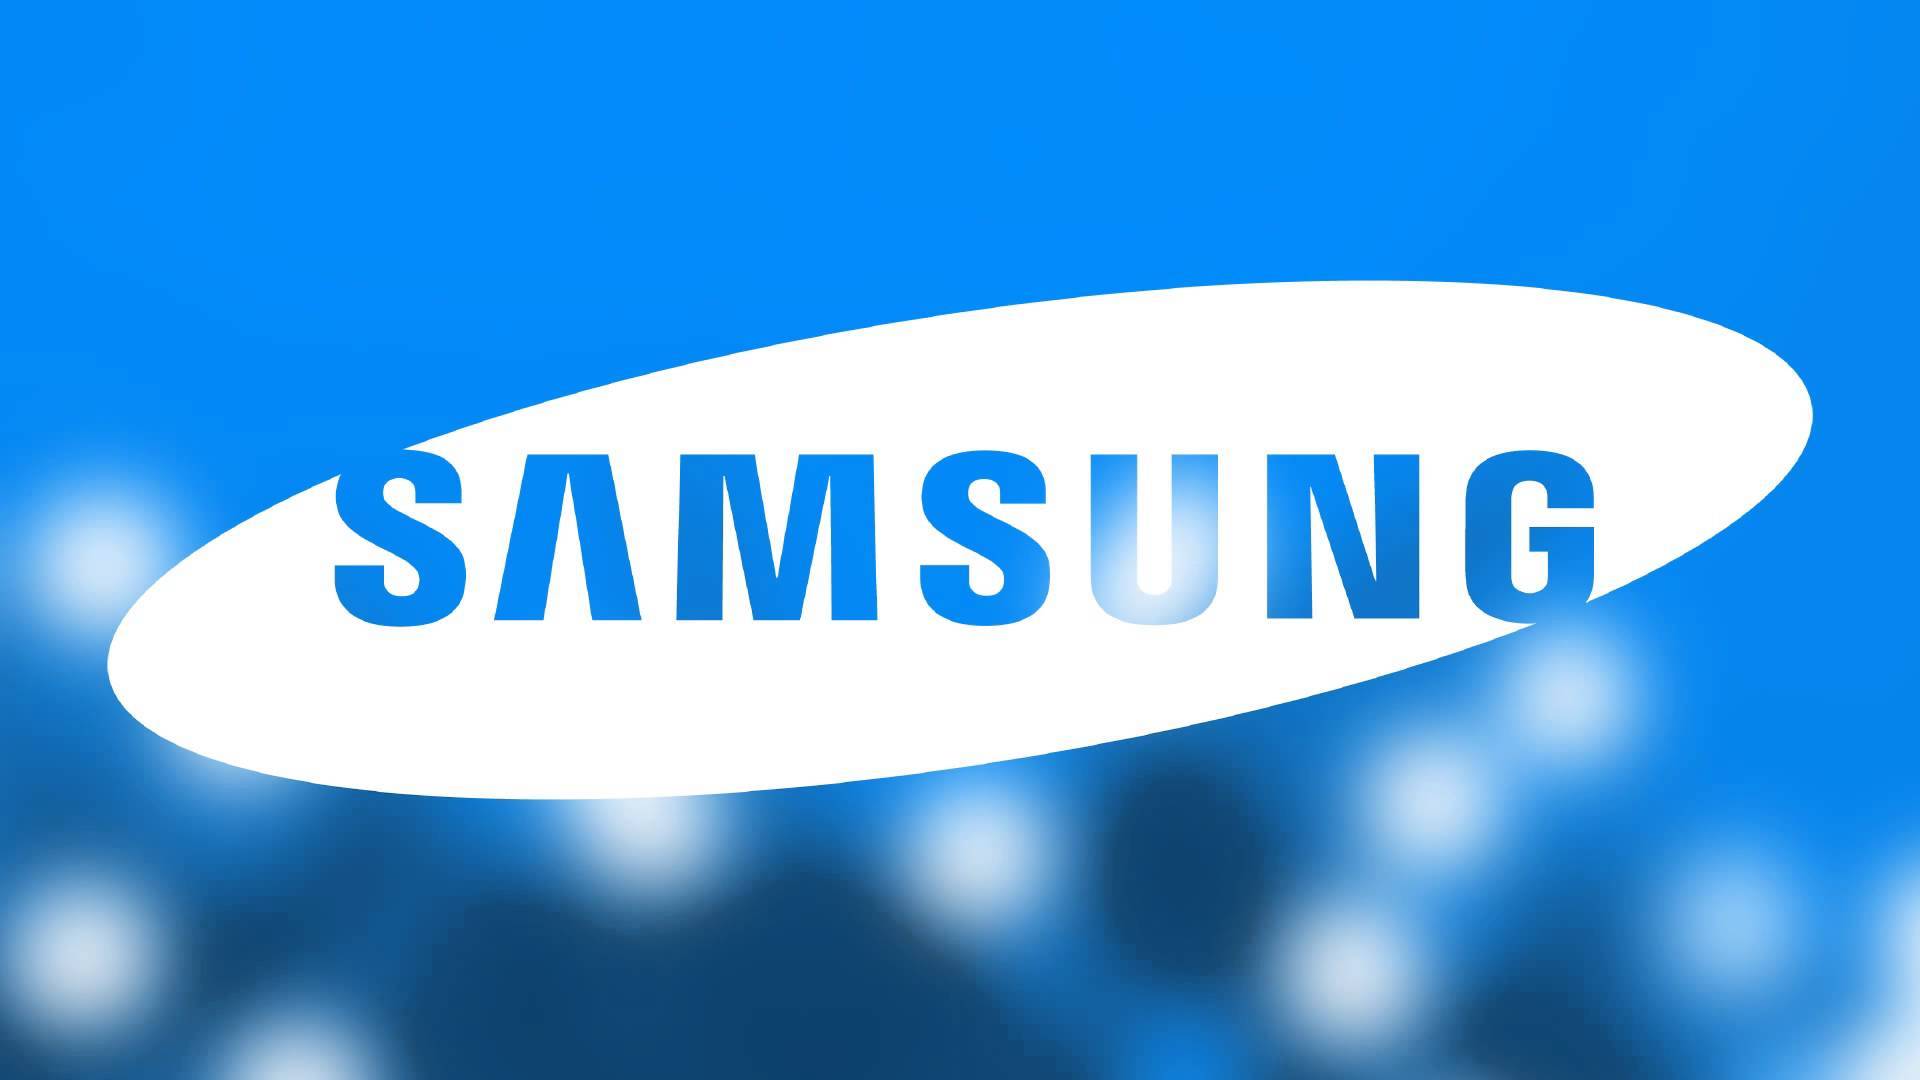 Samsung TV Logo - Samsung to Offer TV Advertising Insights To 3rd Parties Via ACR - TV ...